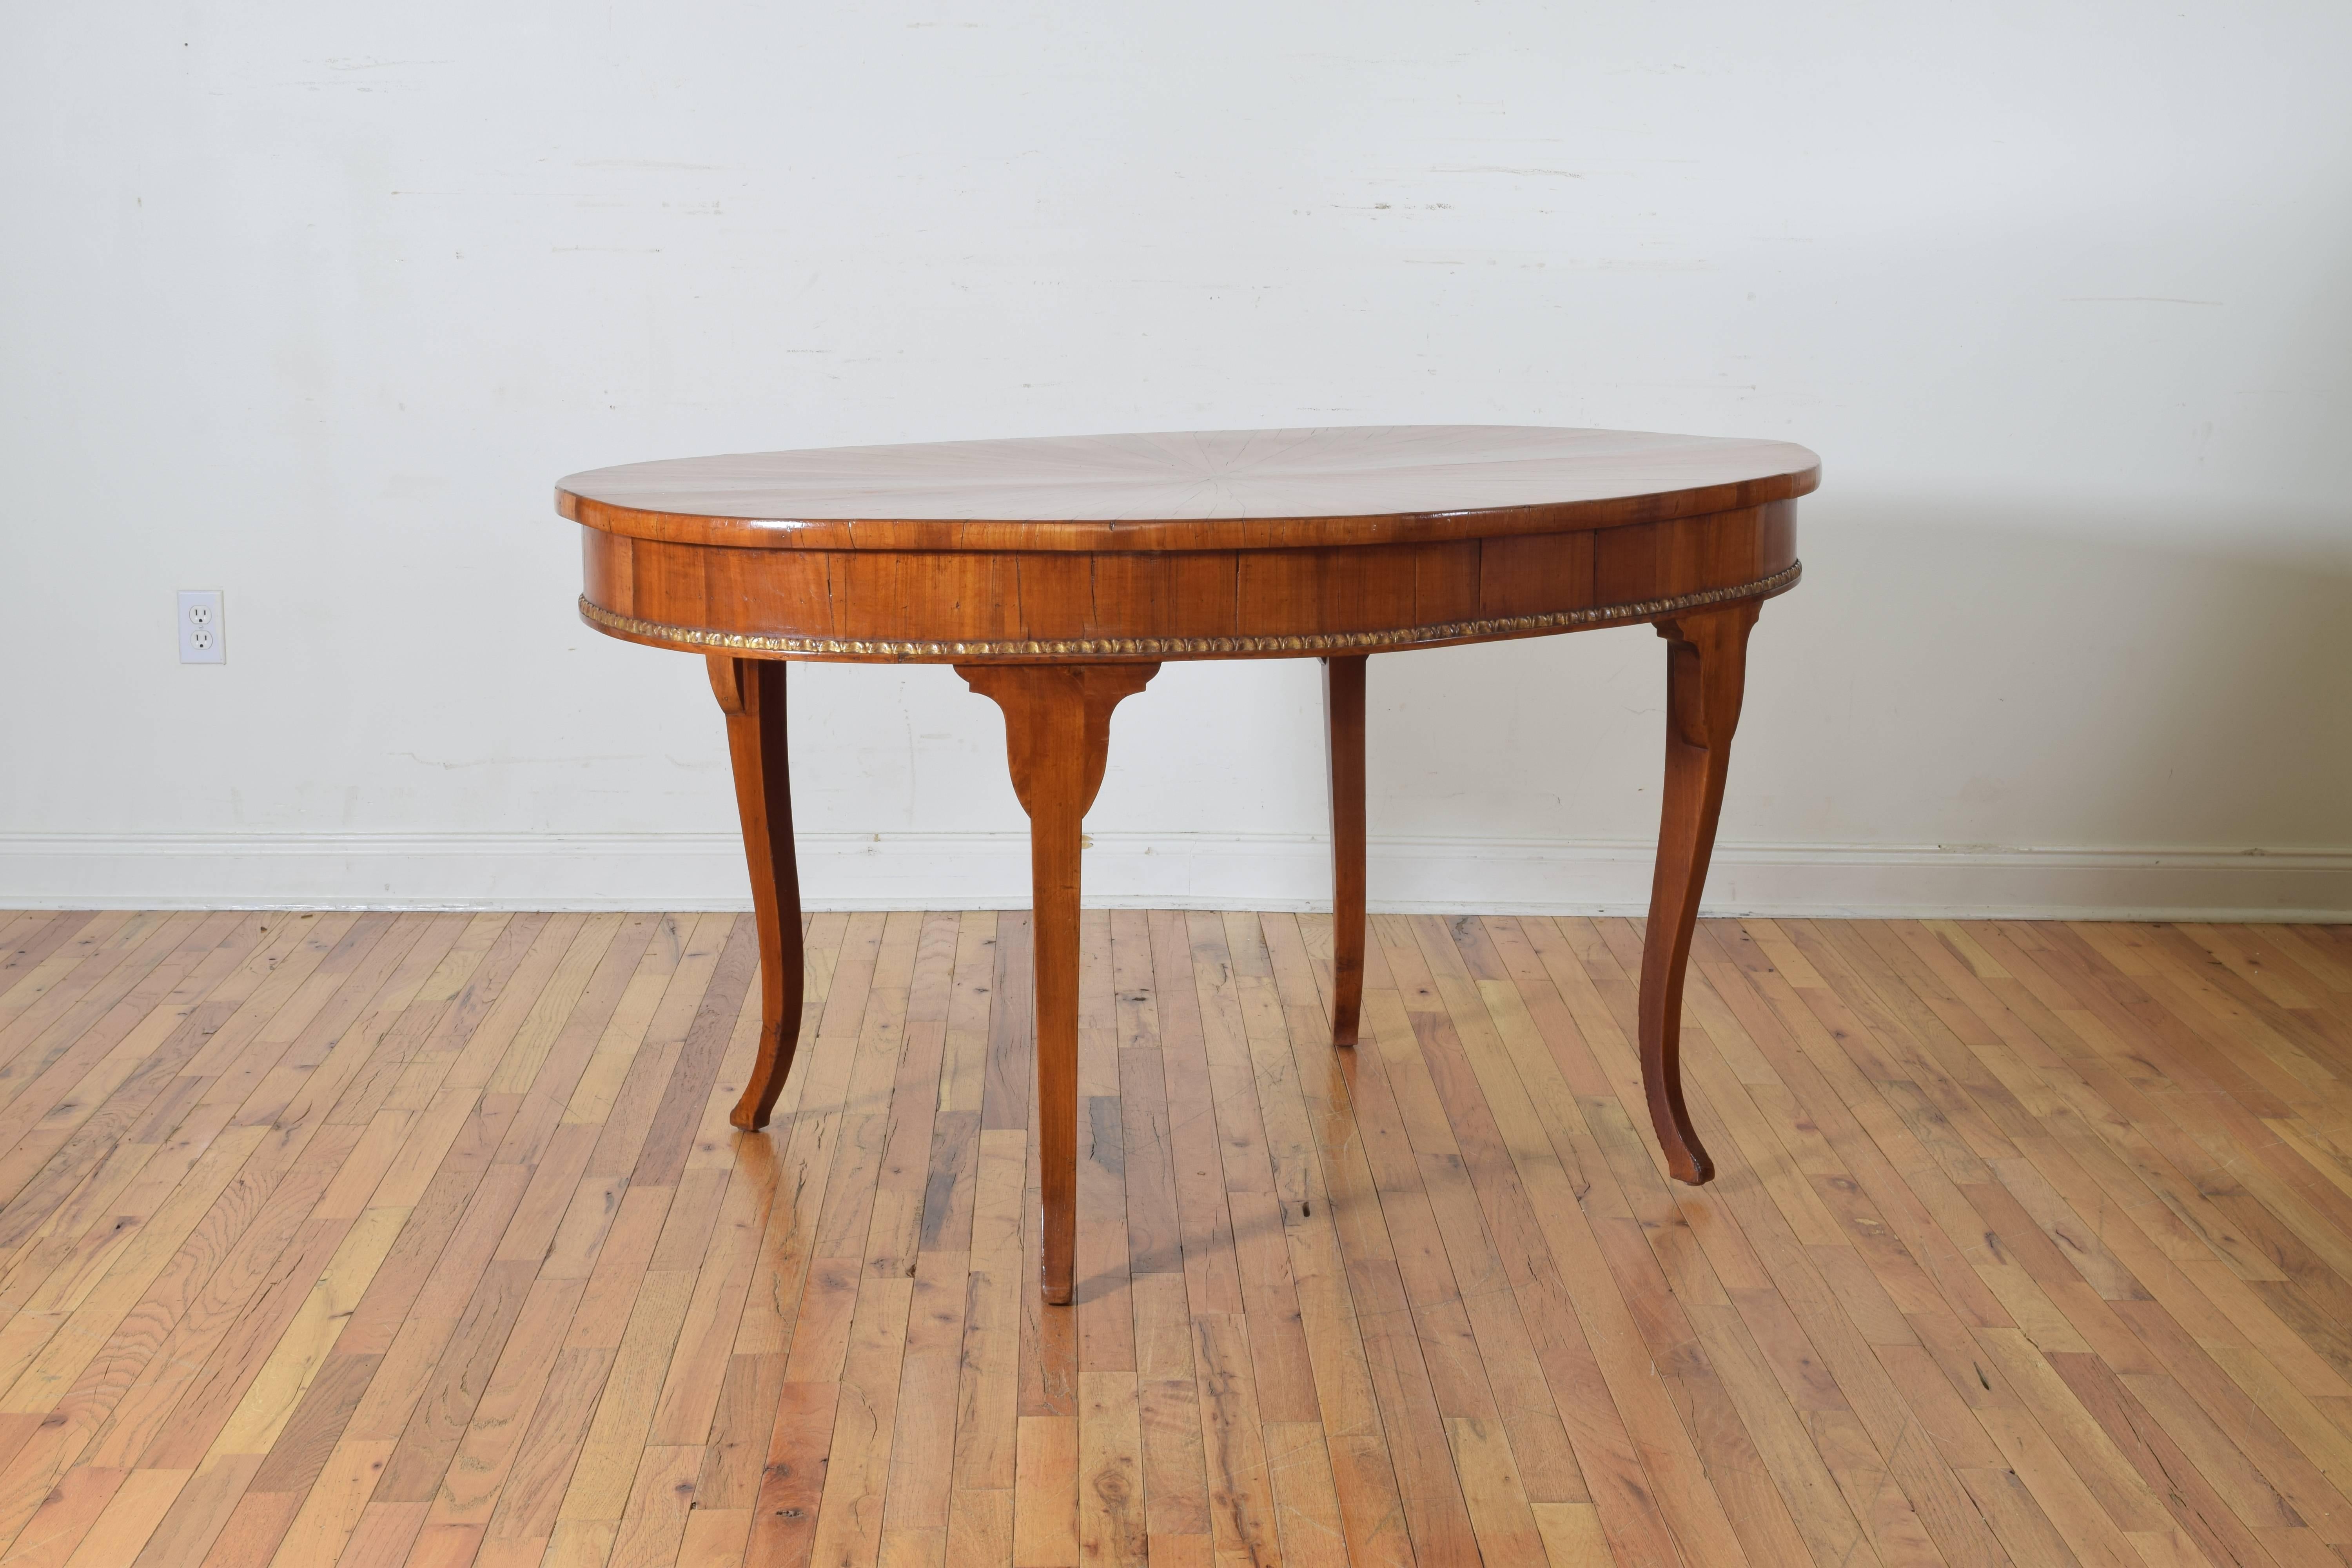 The oval top with radial veneers, the deep apron with a carved and gilded bottom molding, raised on interestingly shaped curving legs.